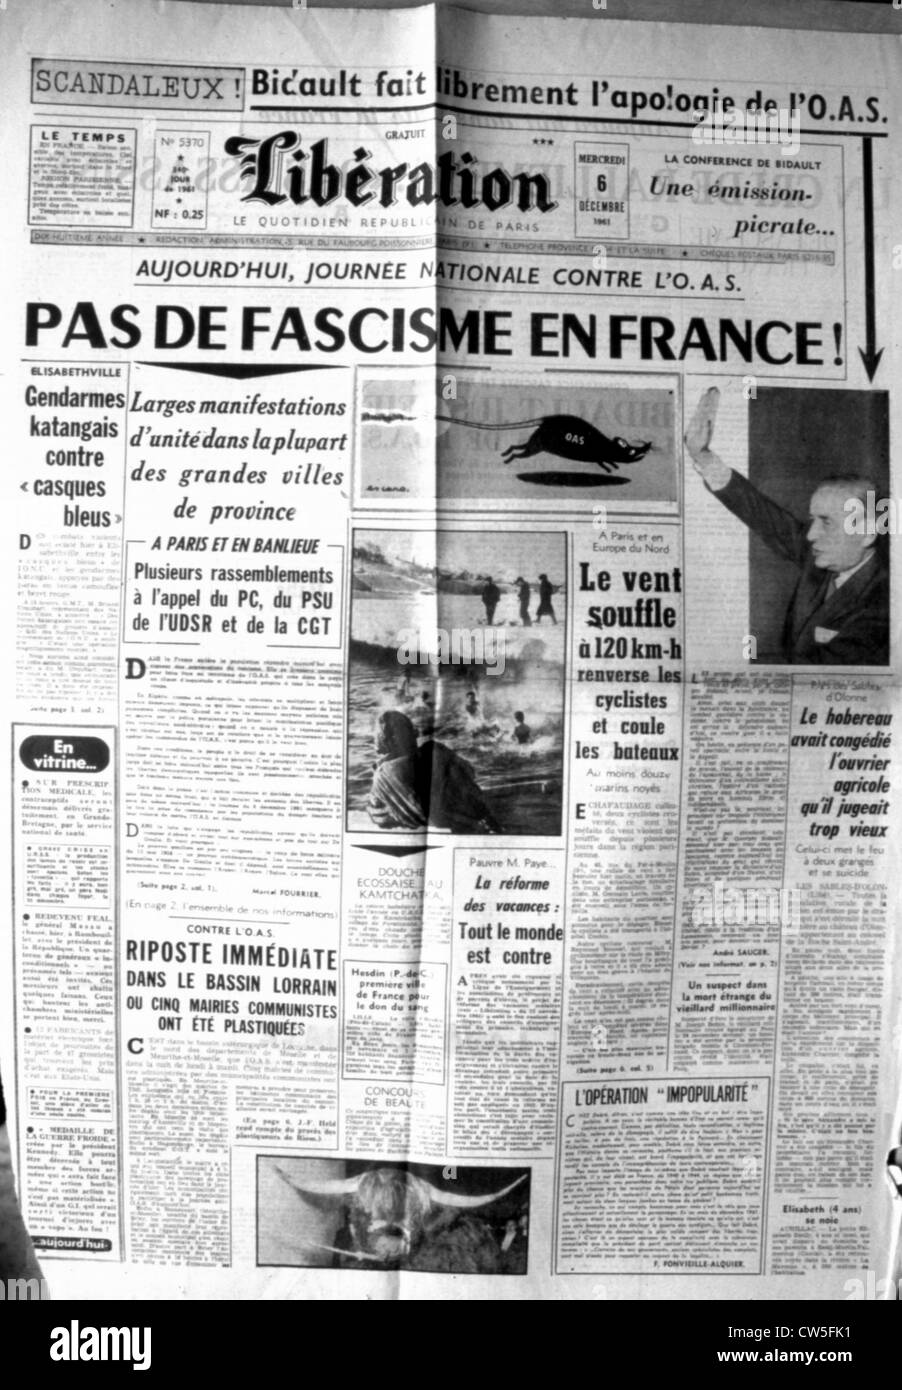 War in Algeria, Front page of the newspaper 'Libération' Stock Photo